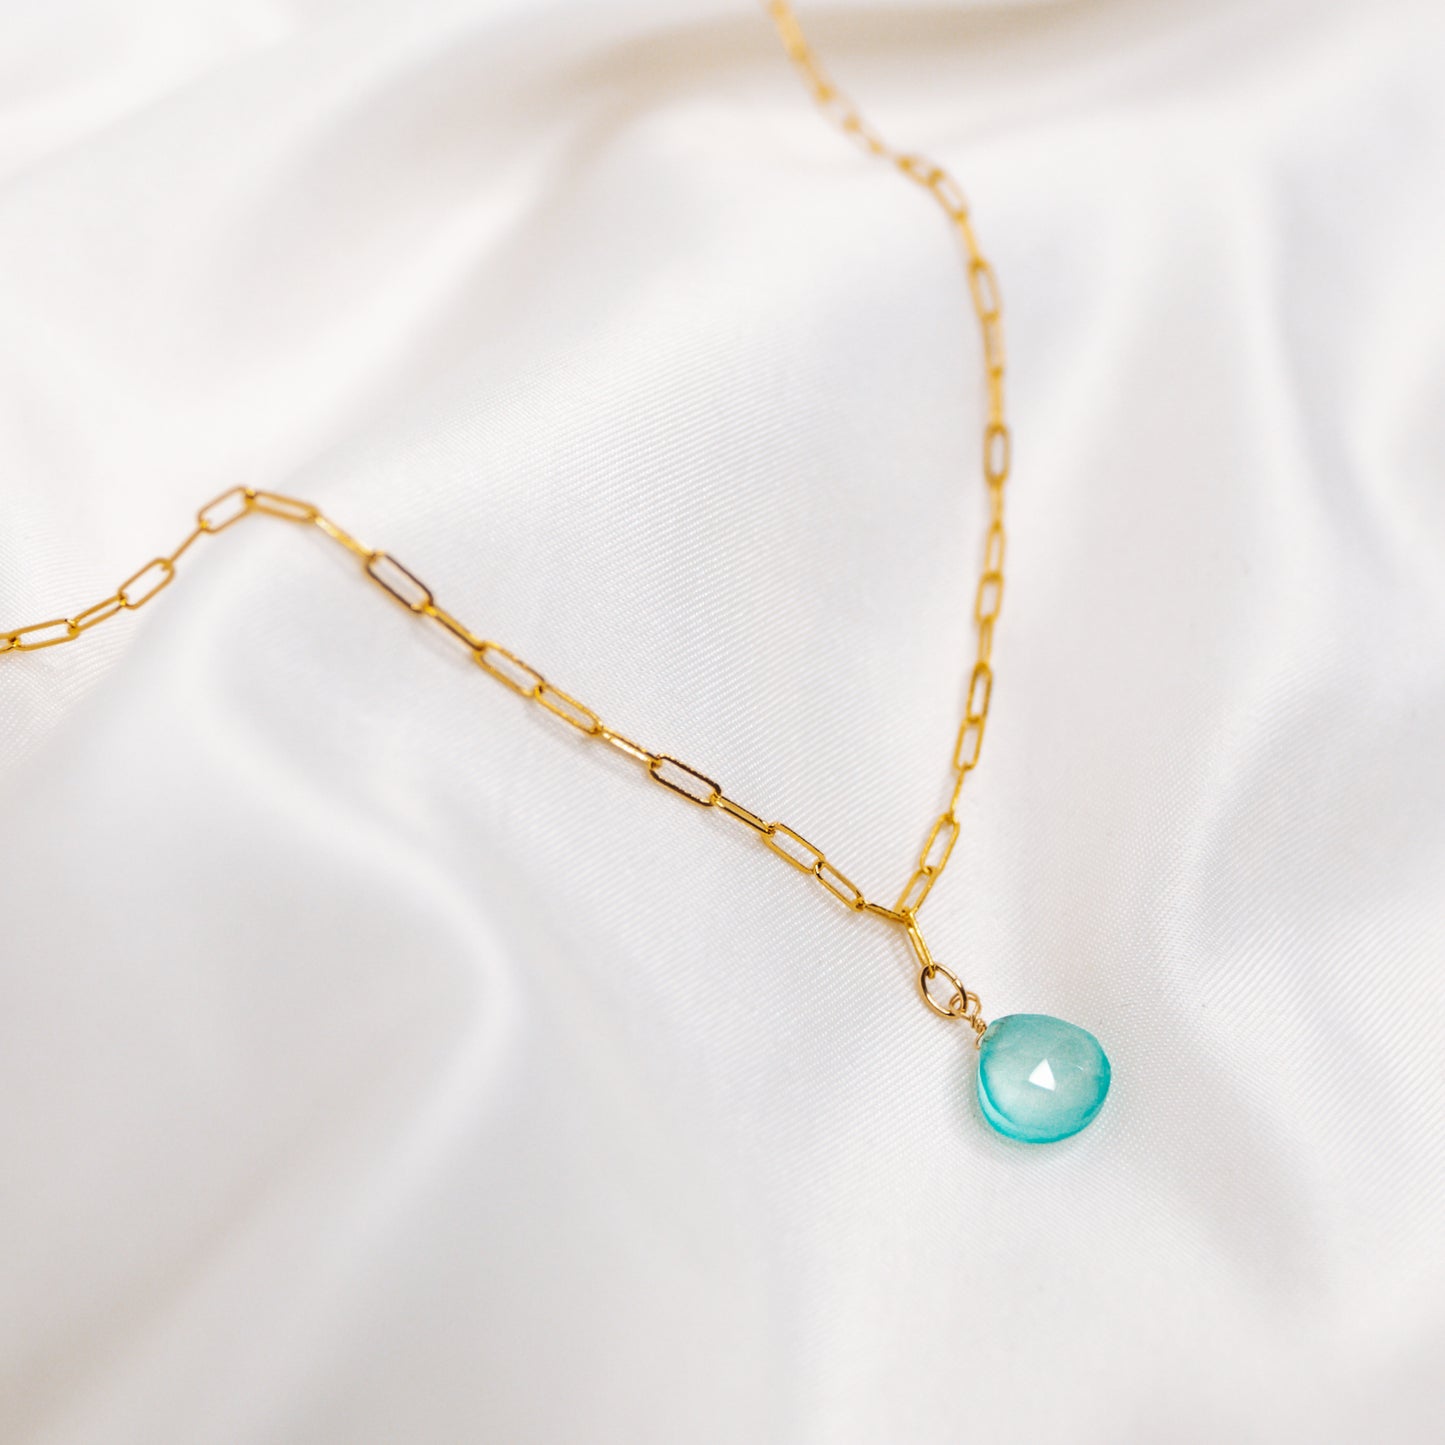 Aqua Blue Chalcedony Gold Filled Link Chain Necklace